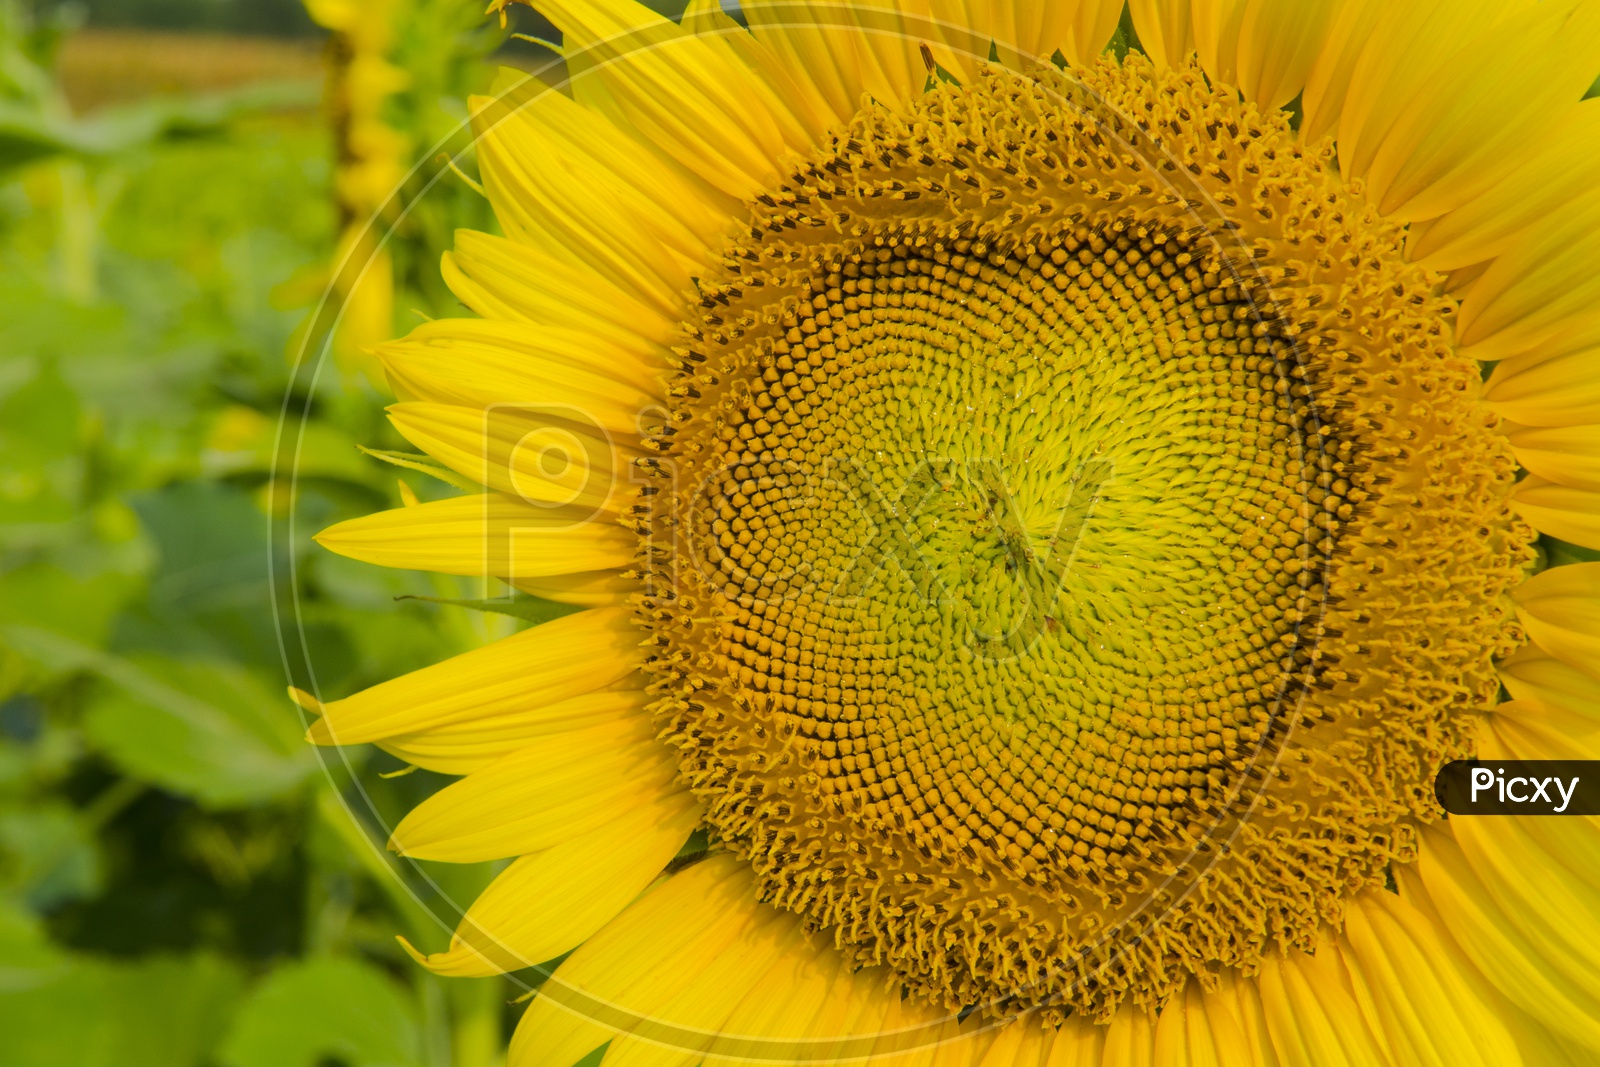 Patterns On Sunflower With Closeup Detailing